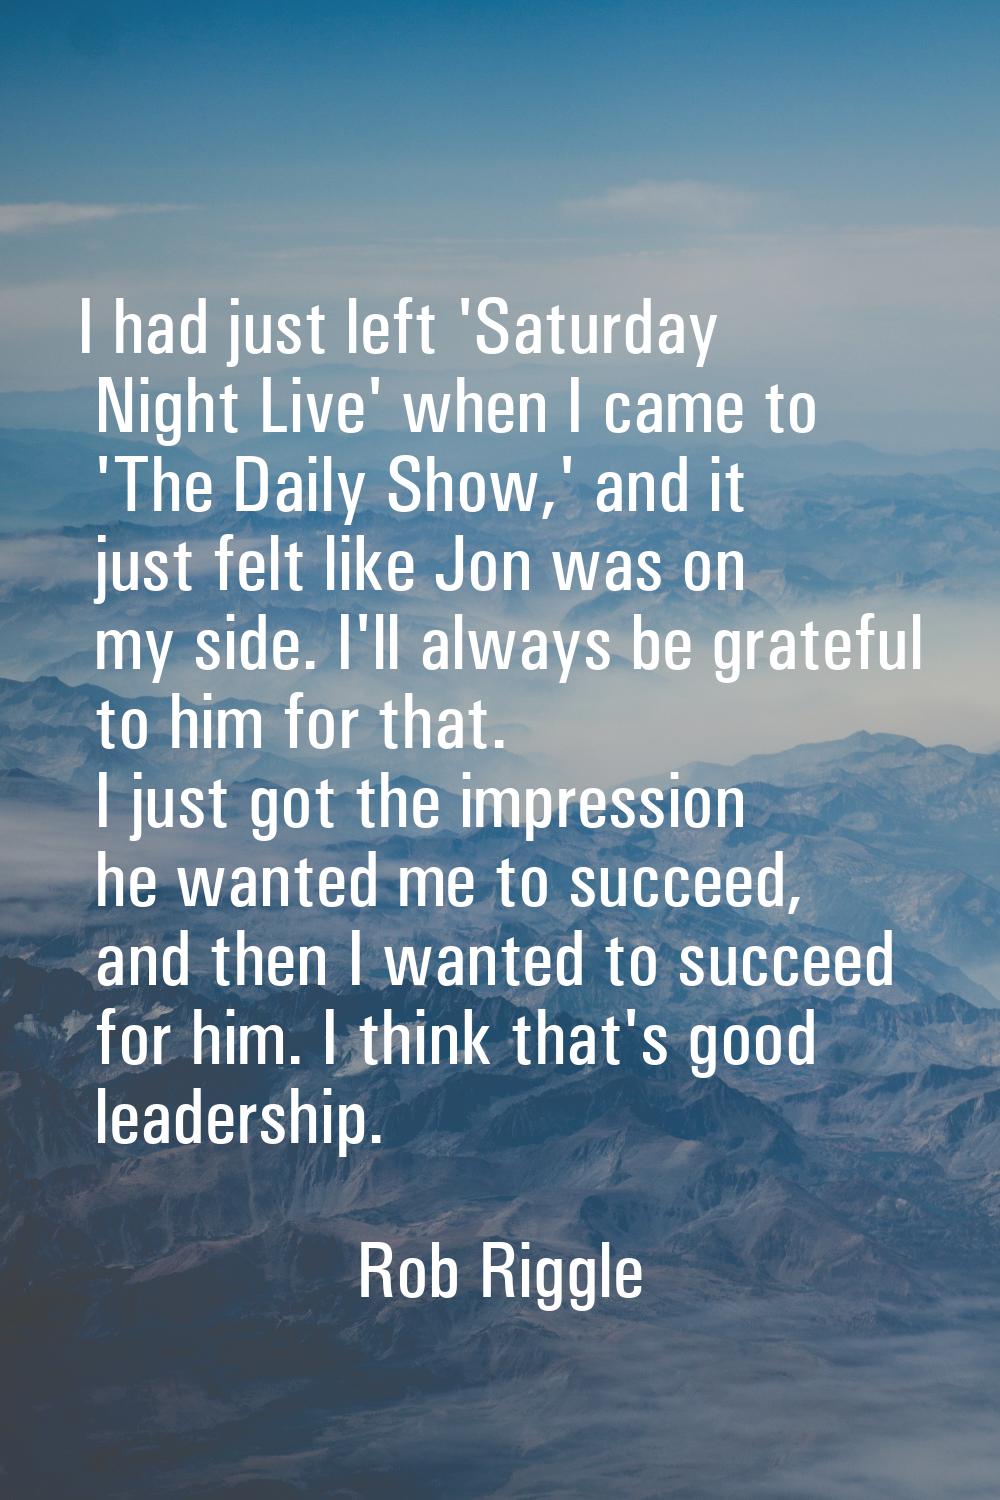 I had just left 'Saturday Night Live' when I came to 'The Daily Show,' and it just felt like Jon wa